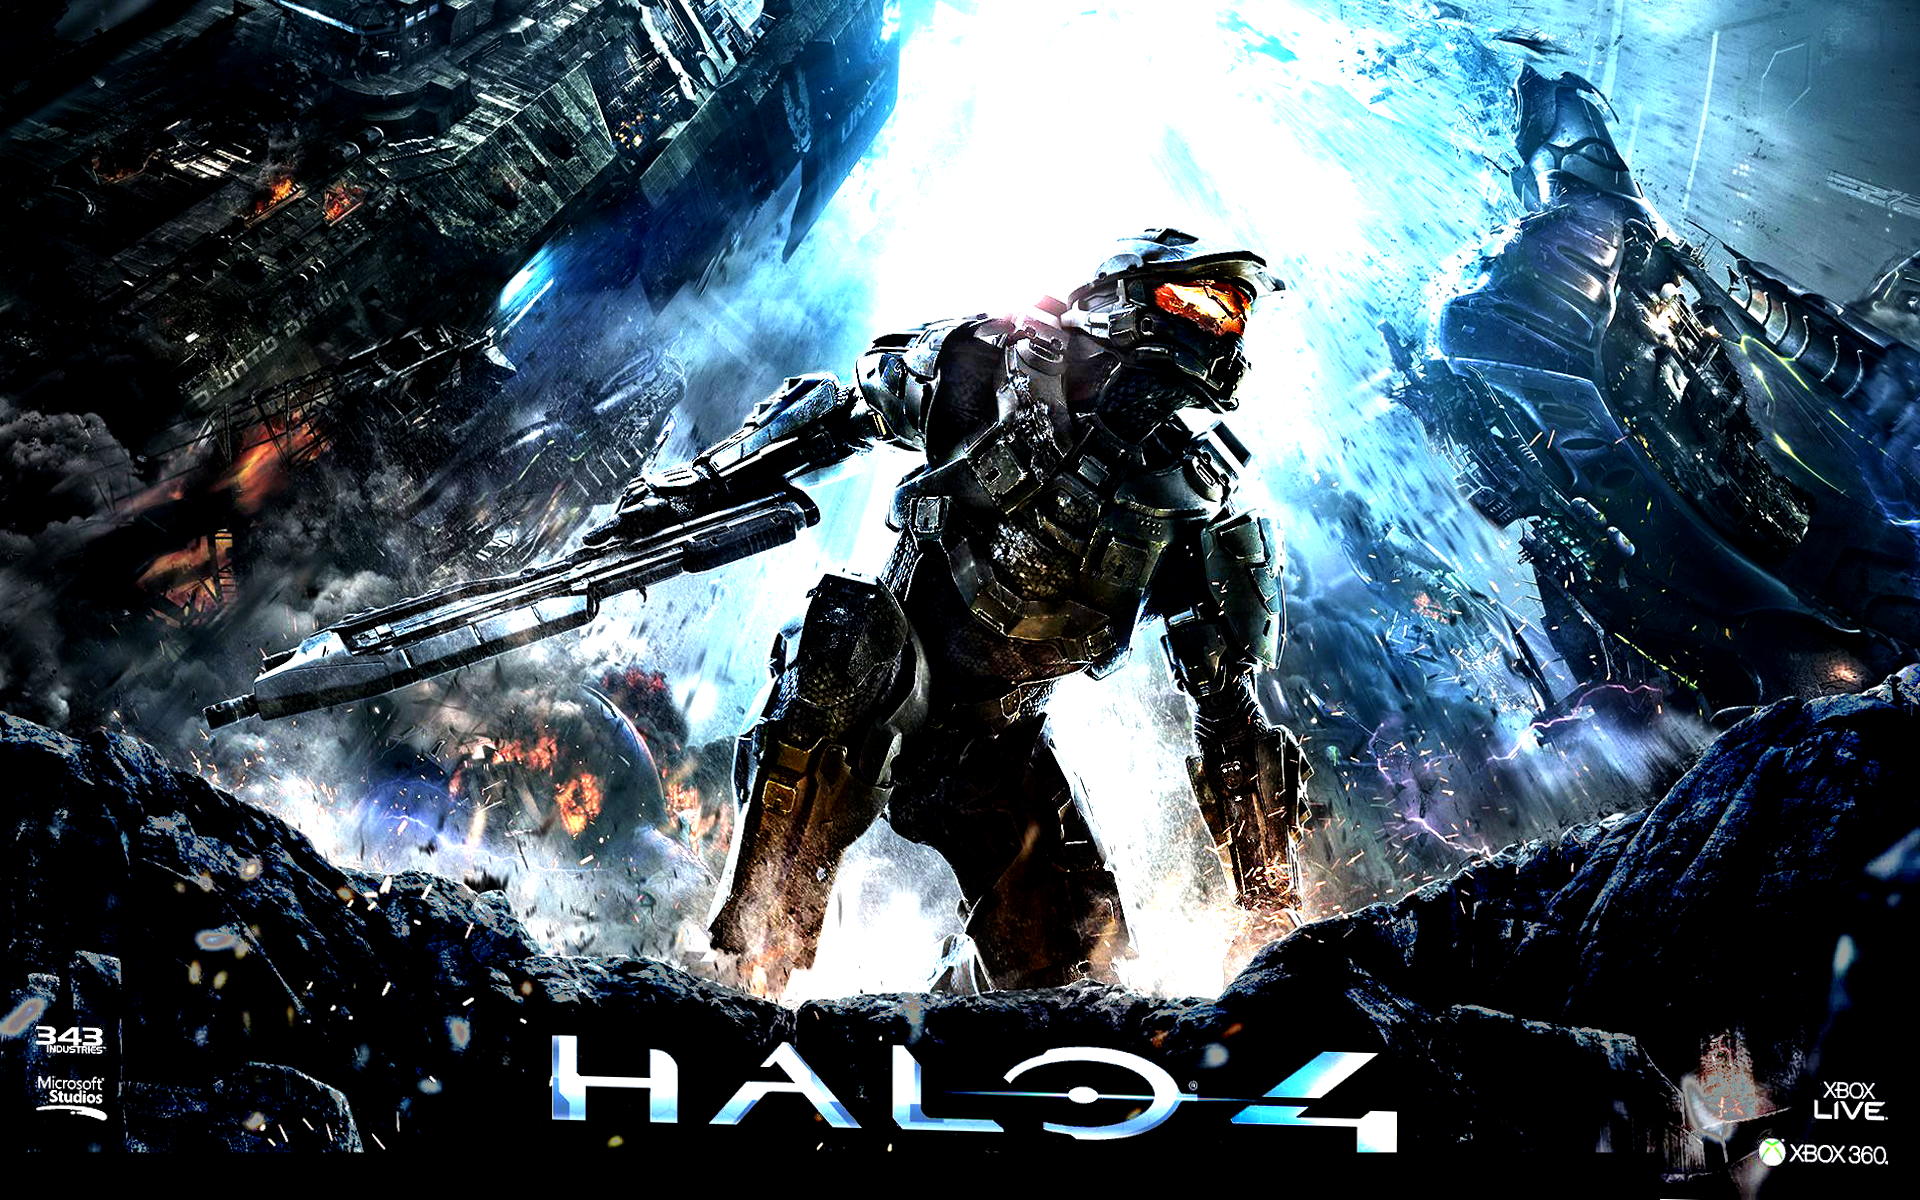 Halo 4 full pc game download